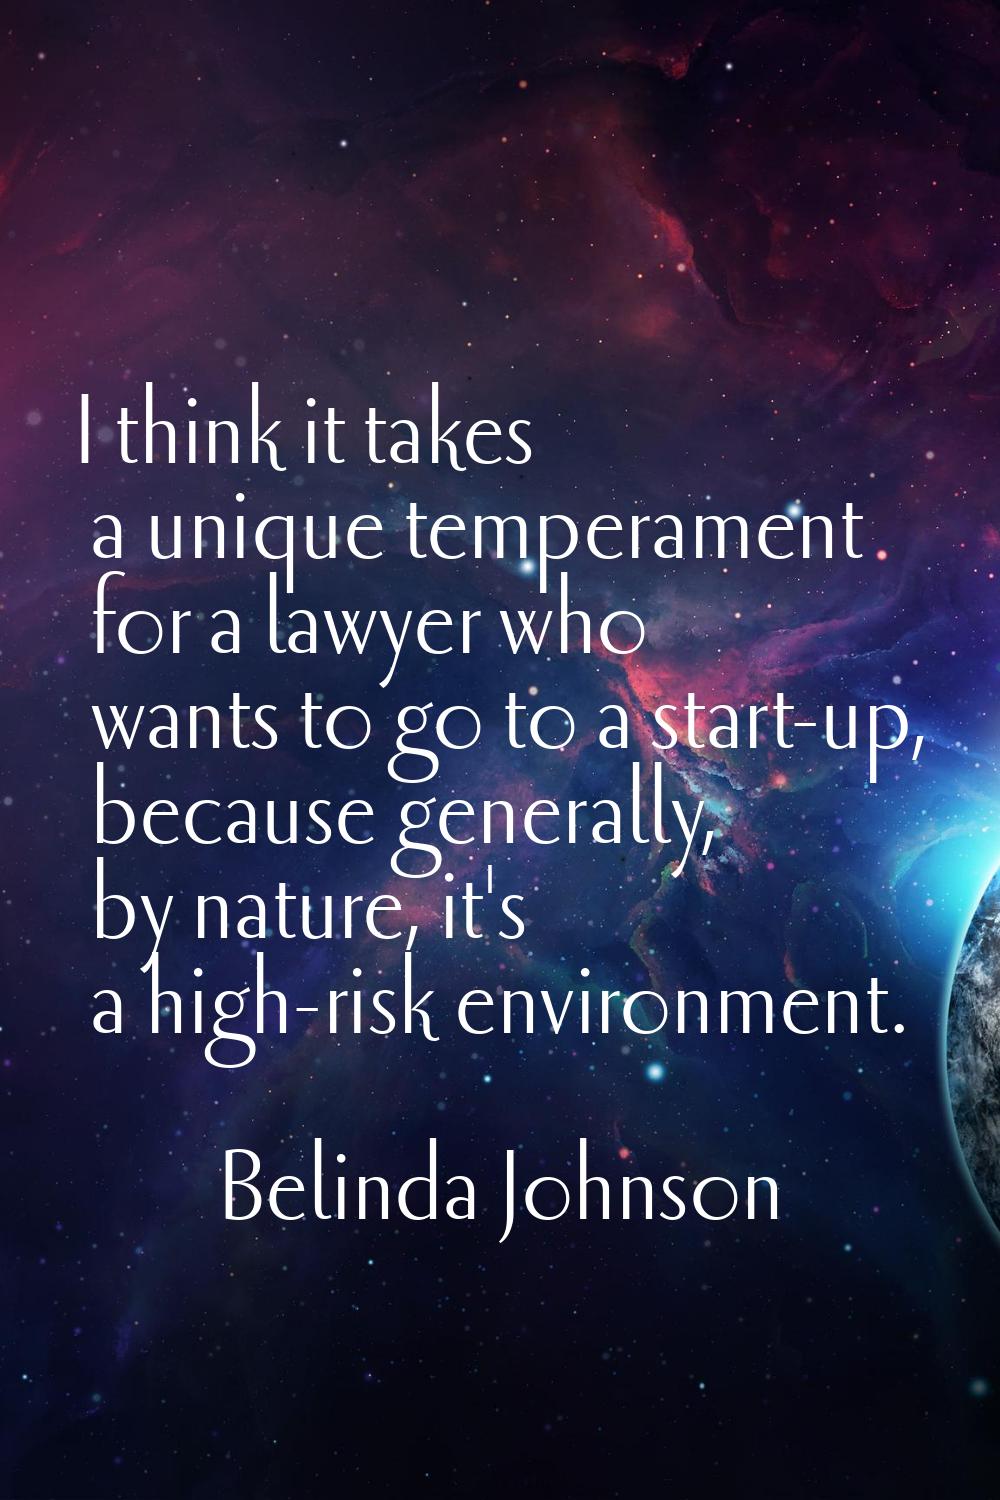 I think it takes a unique temperament for a lawyer who wants to go to a start-up, because generally